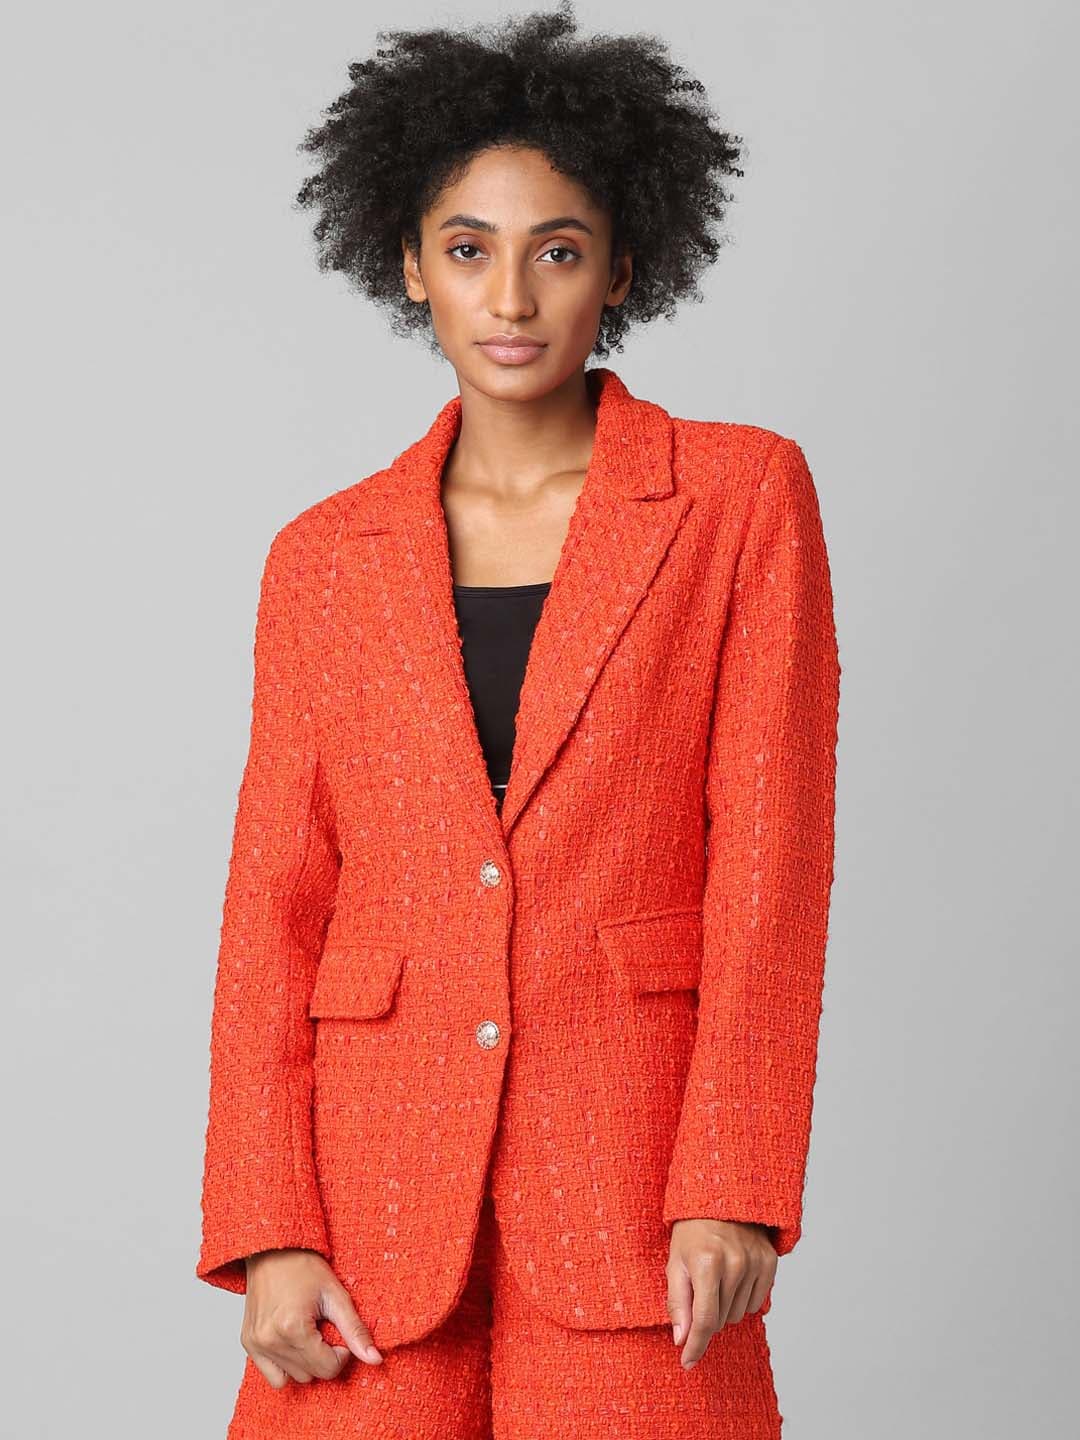 ONLY Women Red Self-Design Tweed Single-Breasted Blazer Price in India